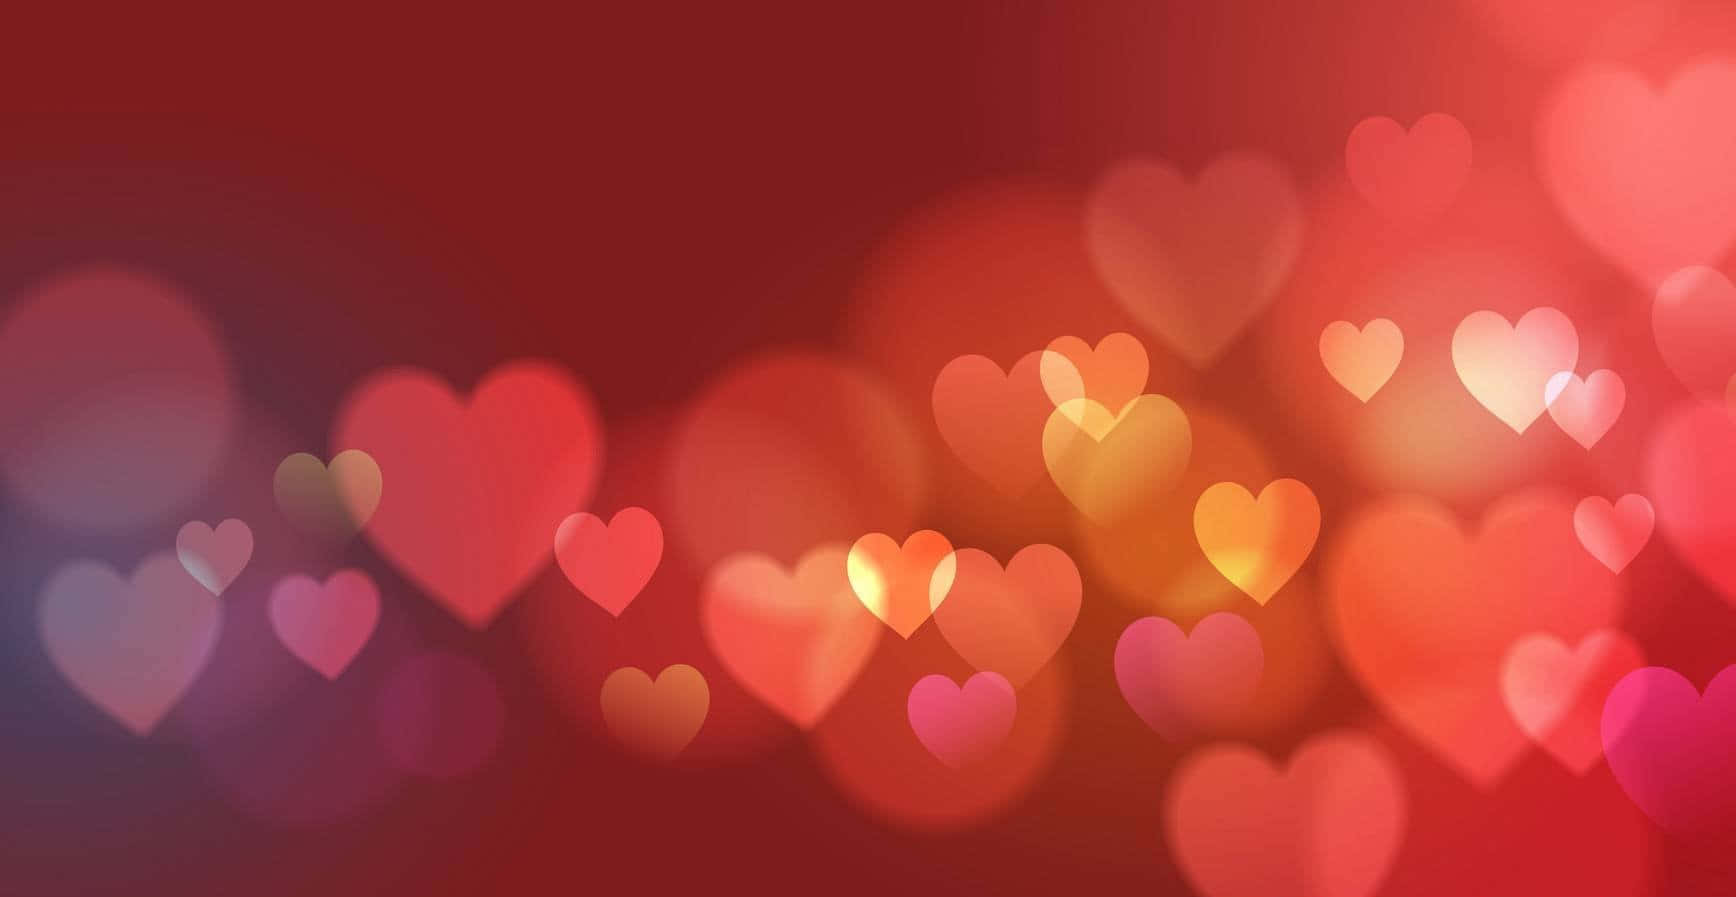 Deep Red Aesthetic Bokeh Hearts Valentine Background